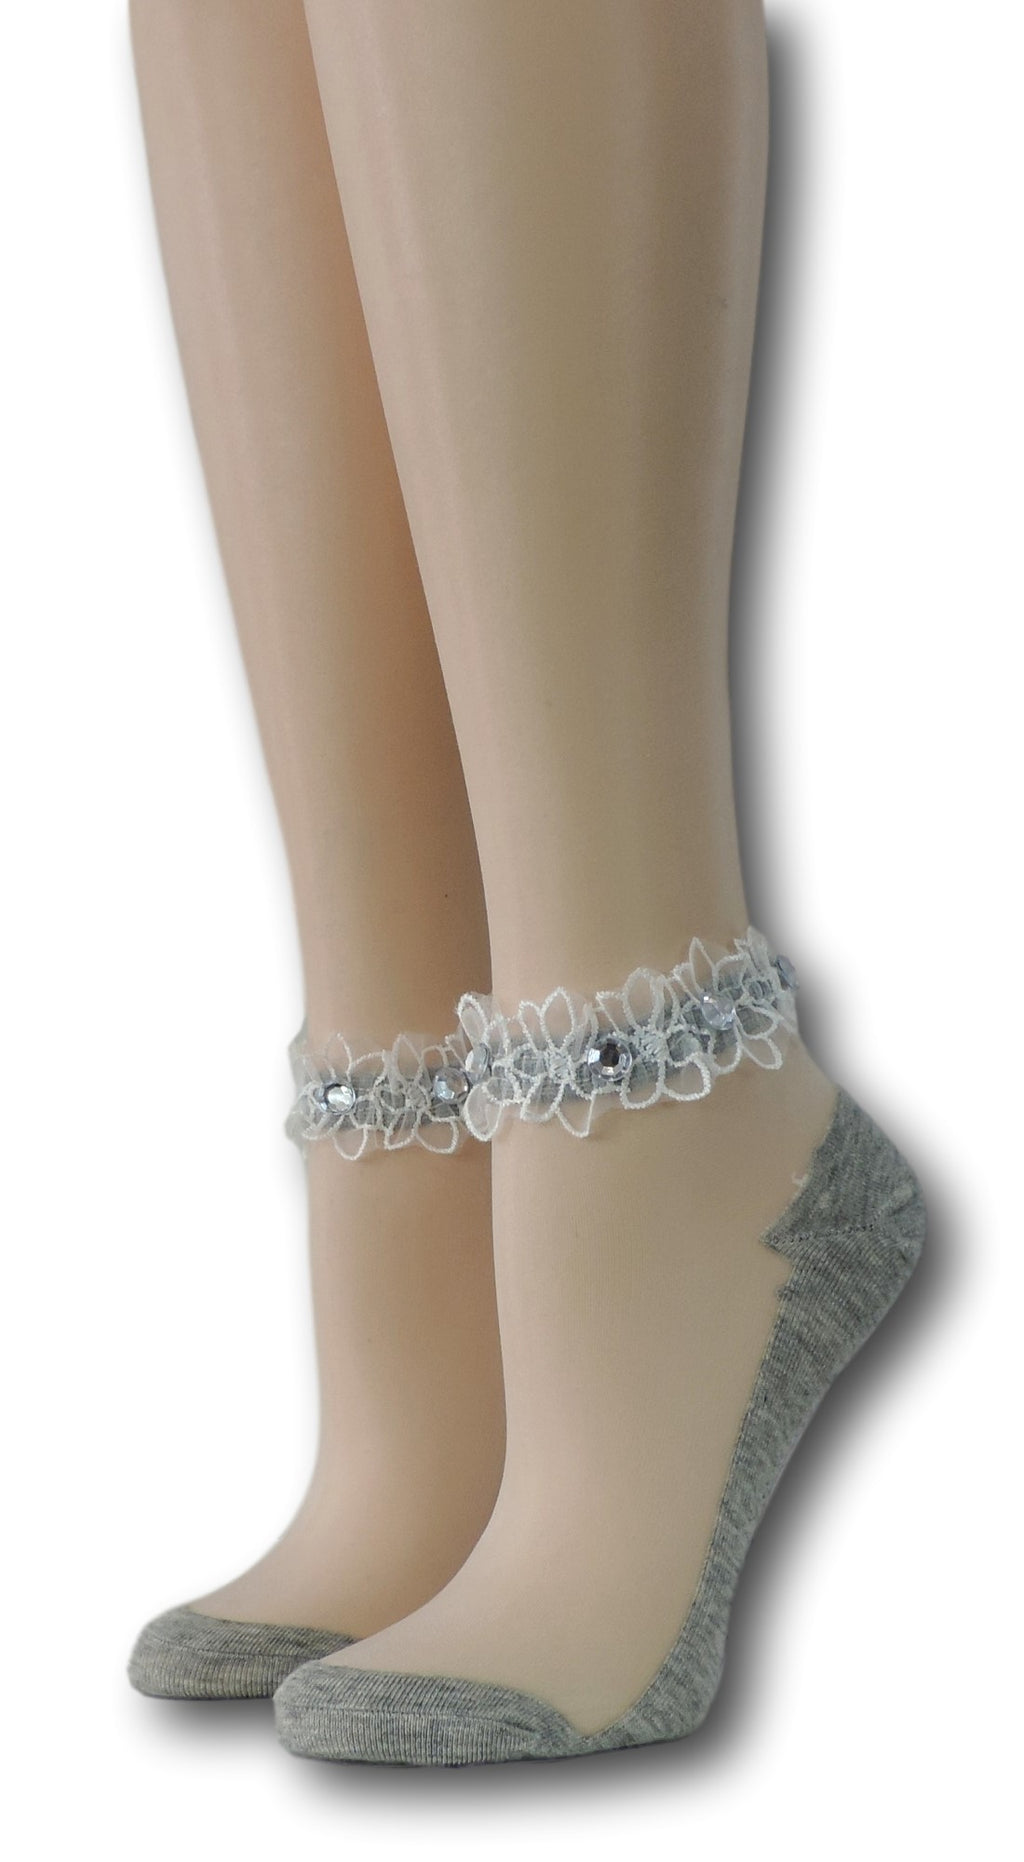 Thick Grey Ankle Sheer Socks with beads